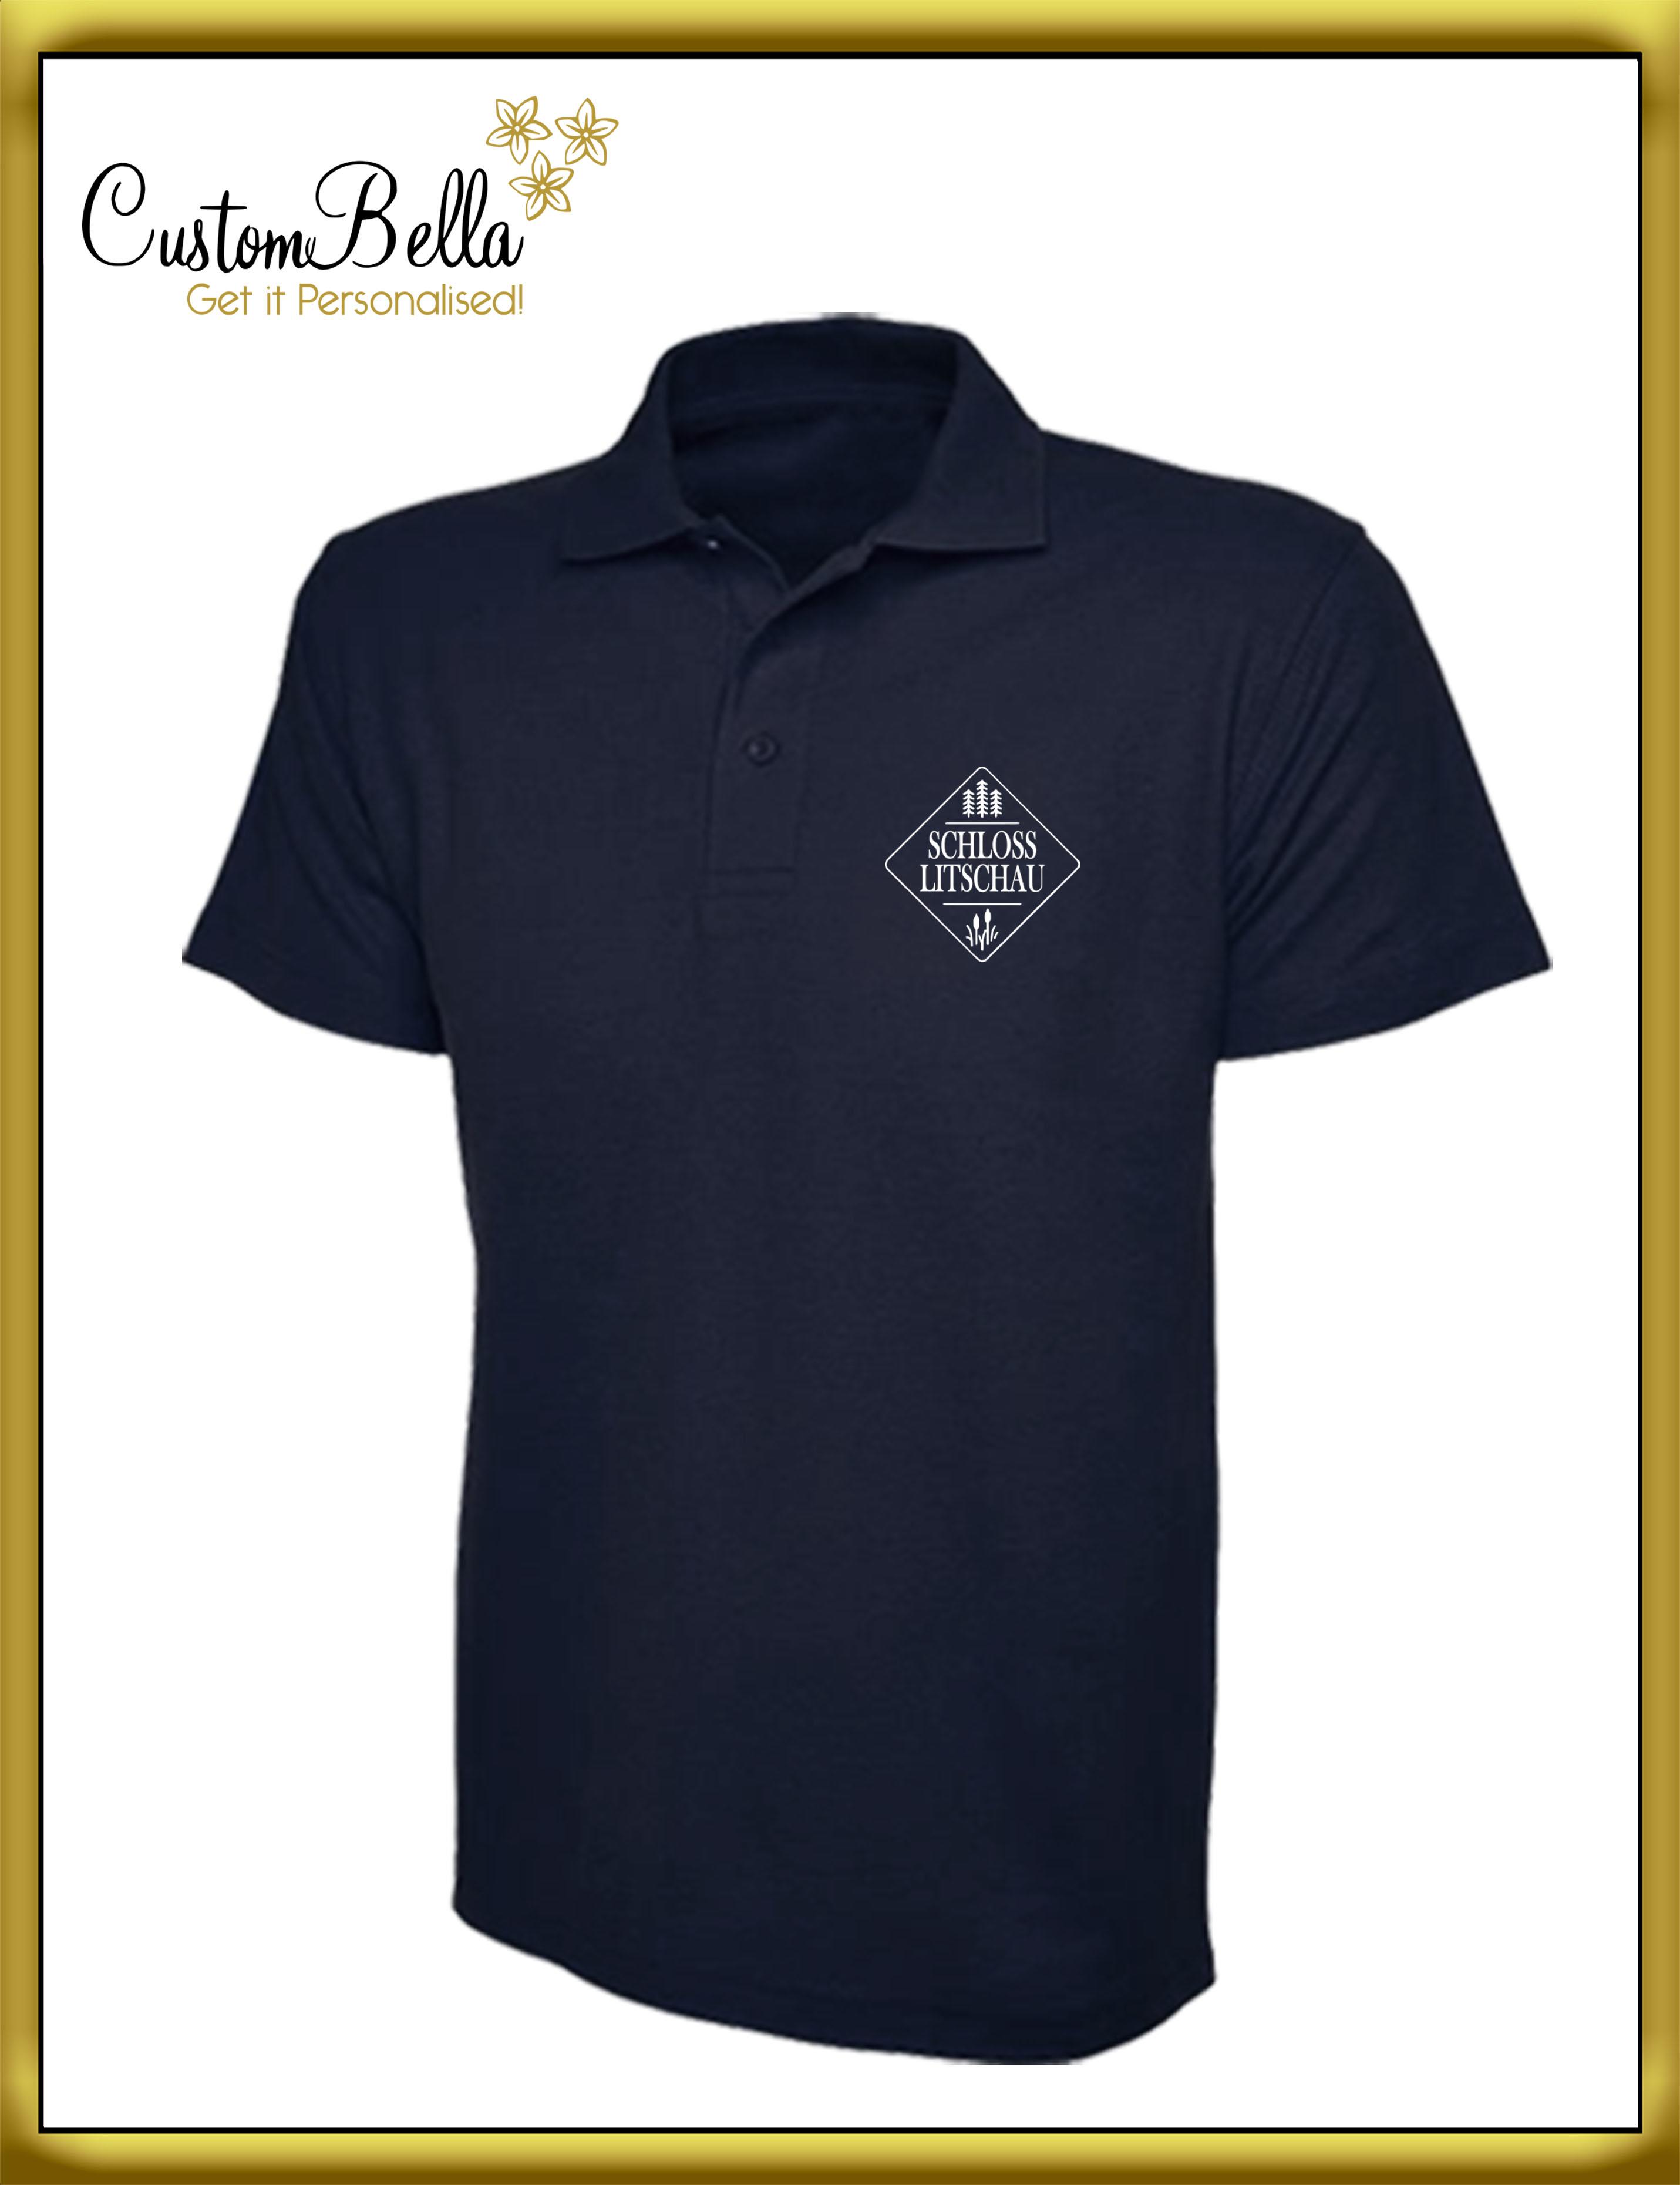 Personalised Polo shirt navy